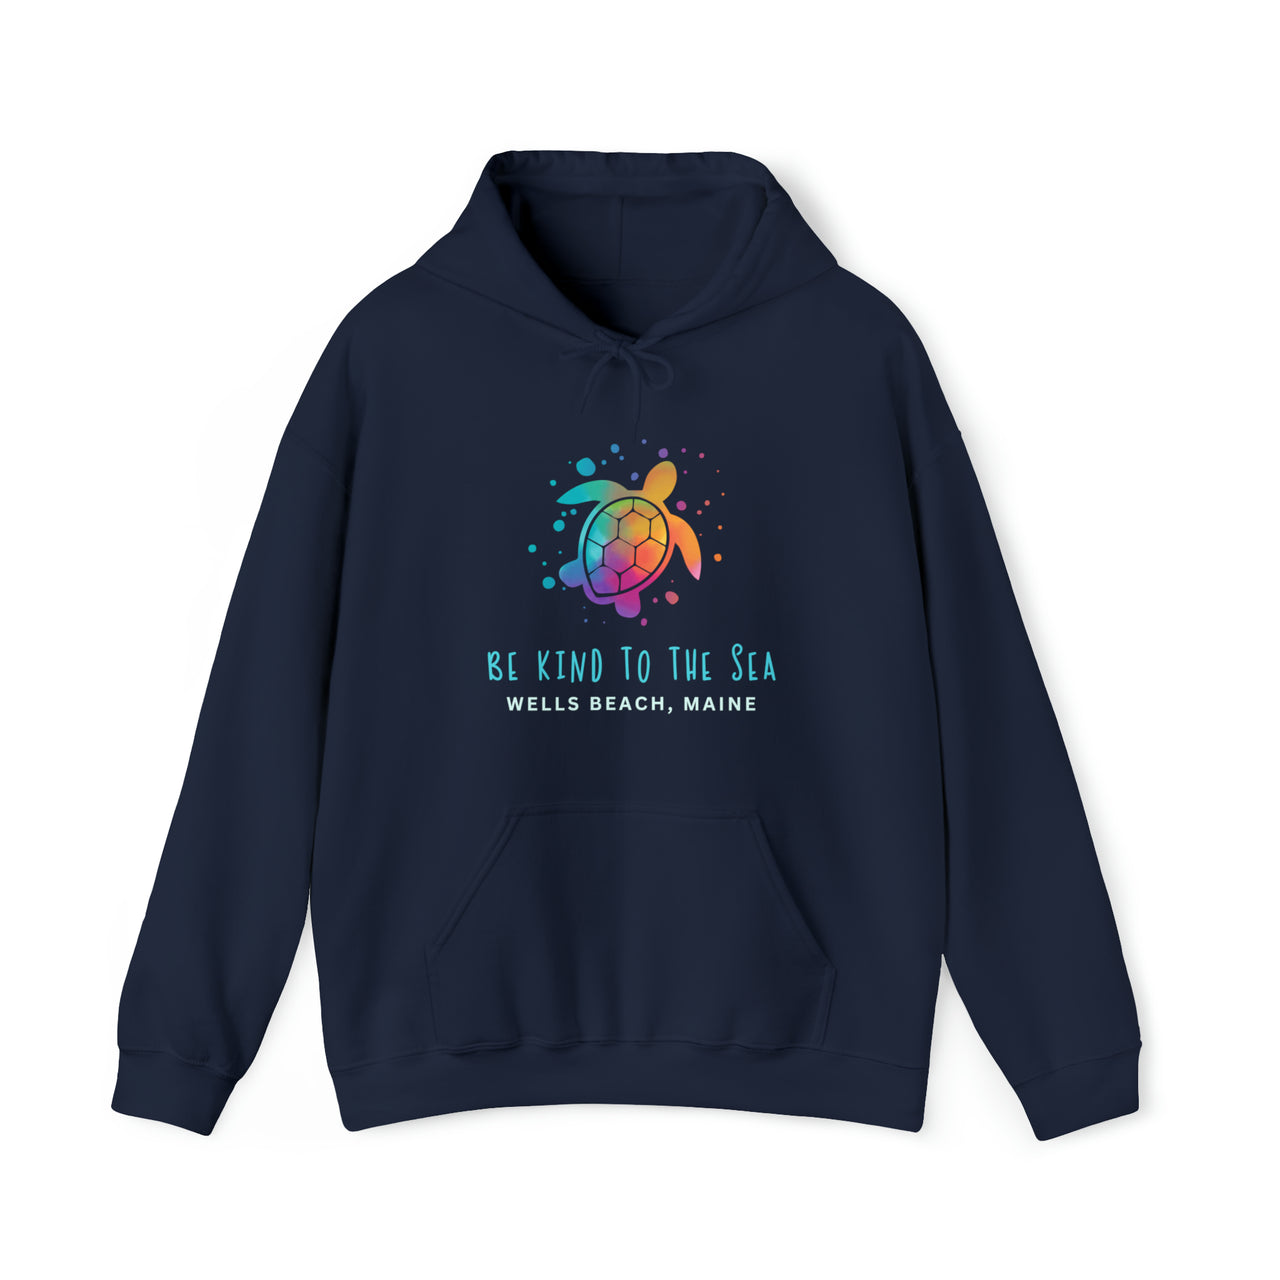 Be Kind to the Sea Heavy Blend Hooded Sweatshirt, Personalized, Navy